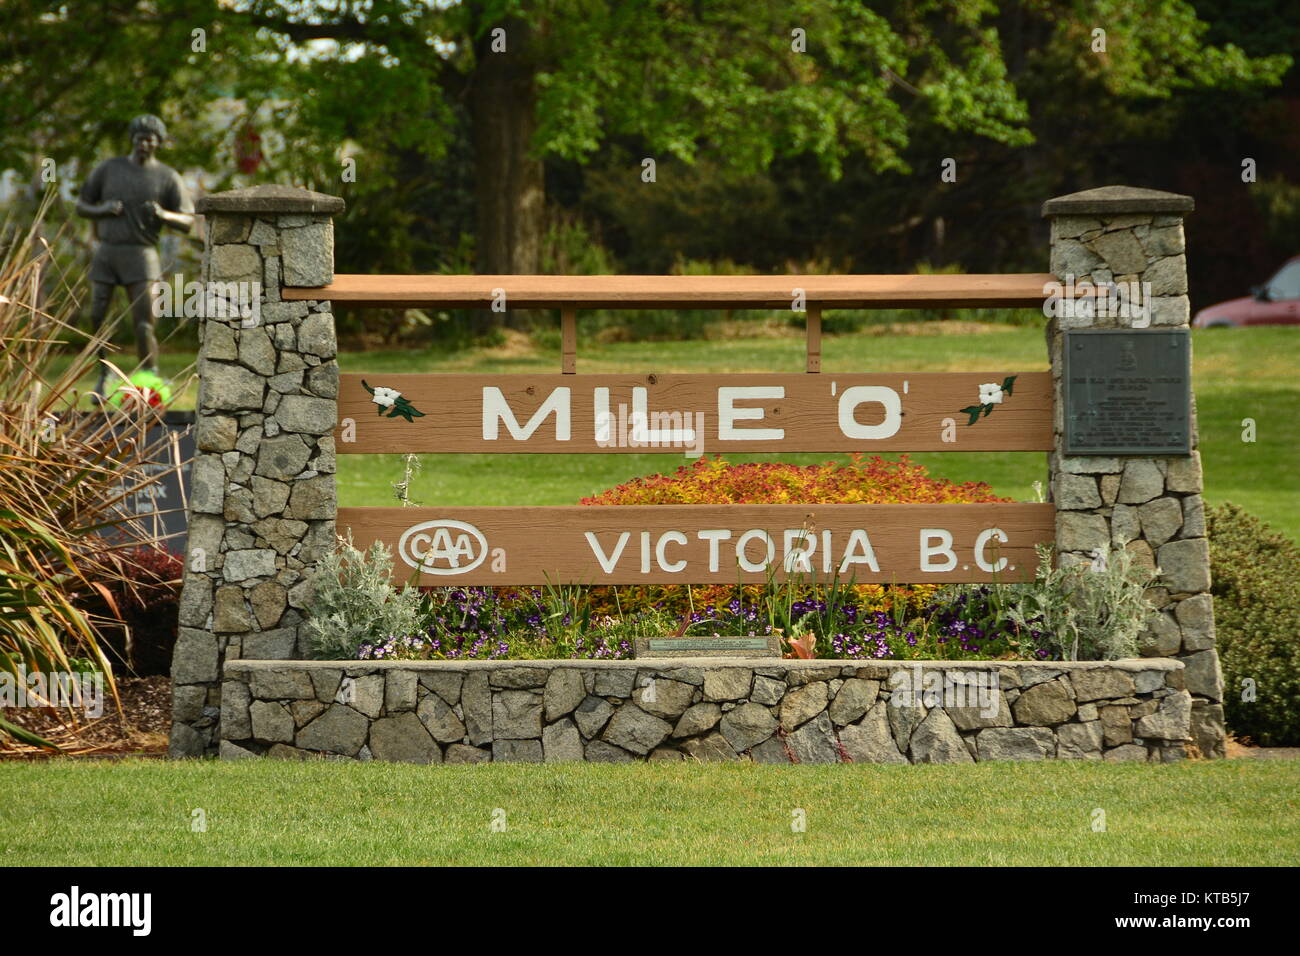 The start of the Trans Canada Highway begins at mile zero in Victoria BC, Canada. Stock Photo